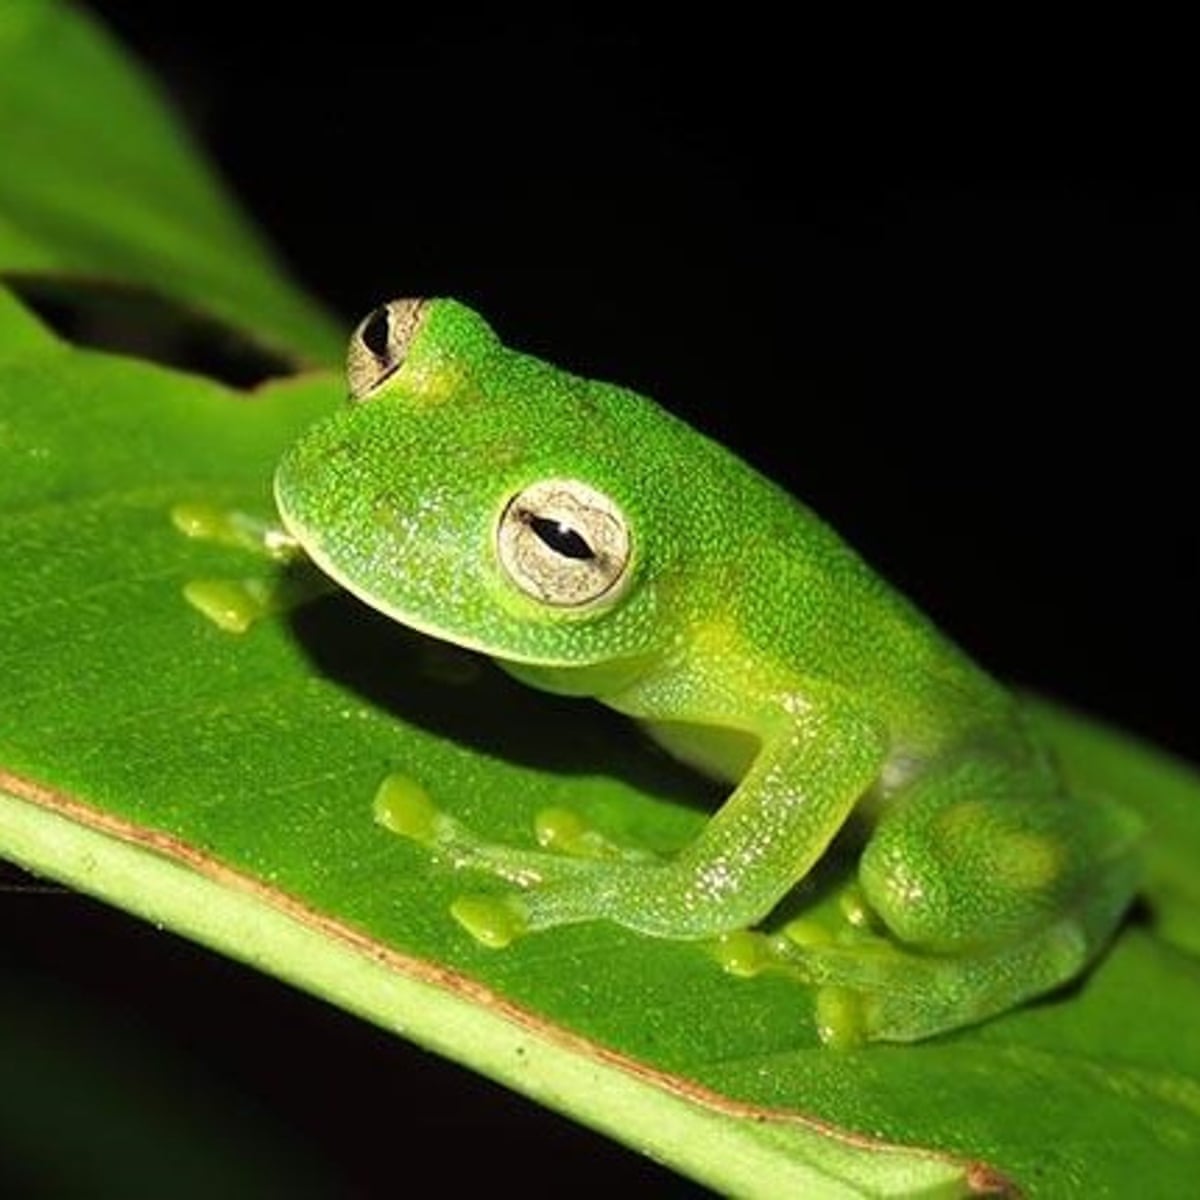 Why glass frogs have see-through skin becomes clear in study | Biology |  The Guardian